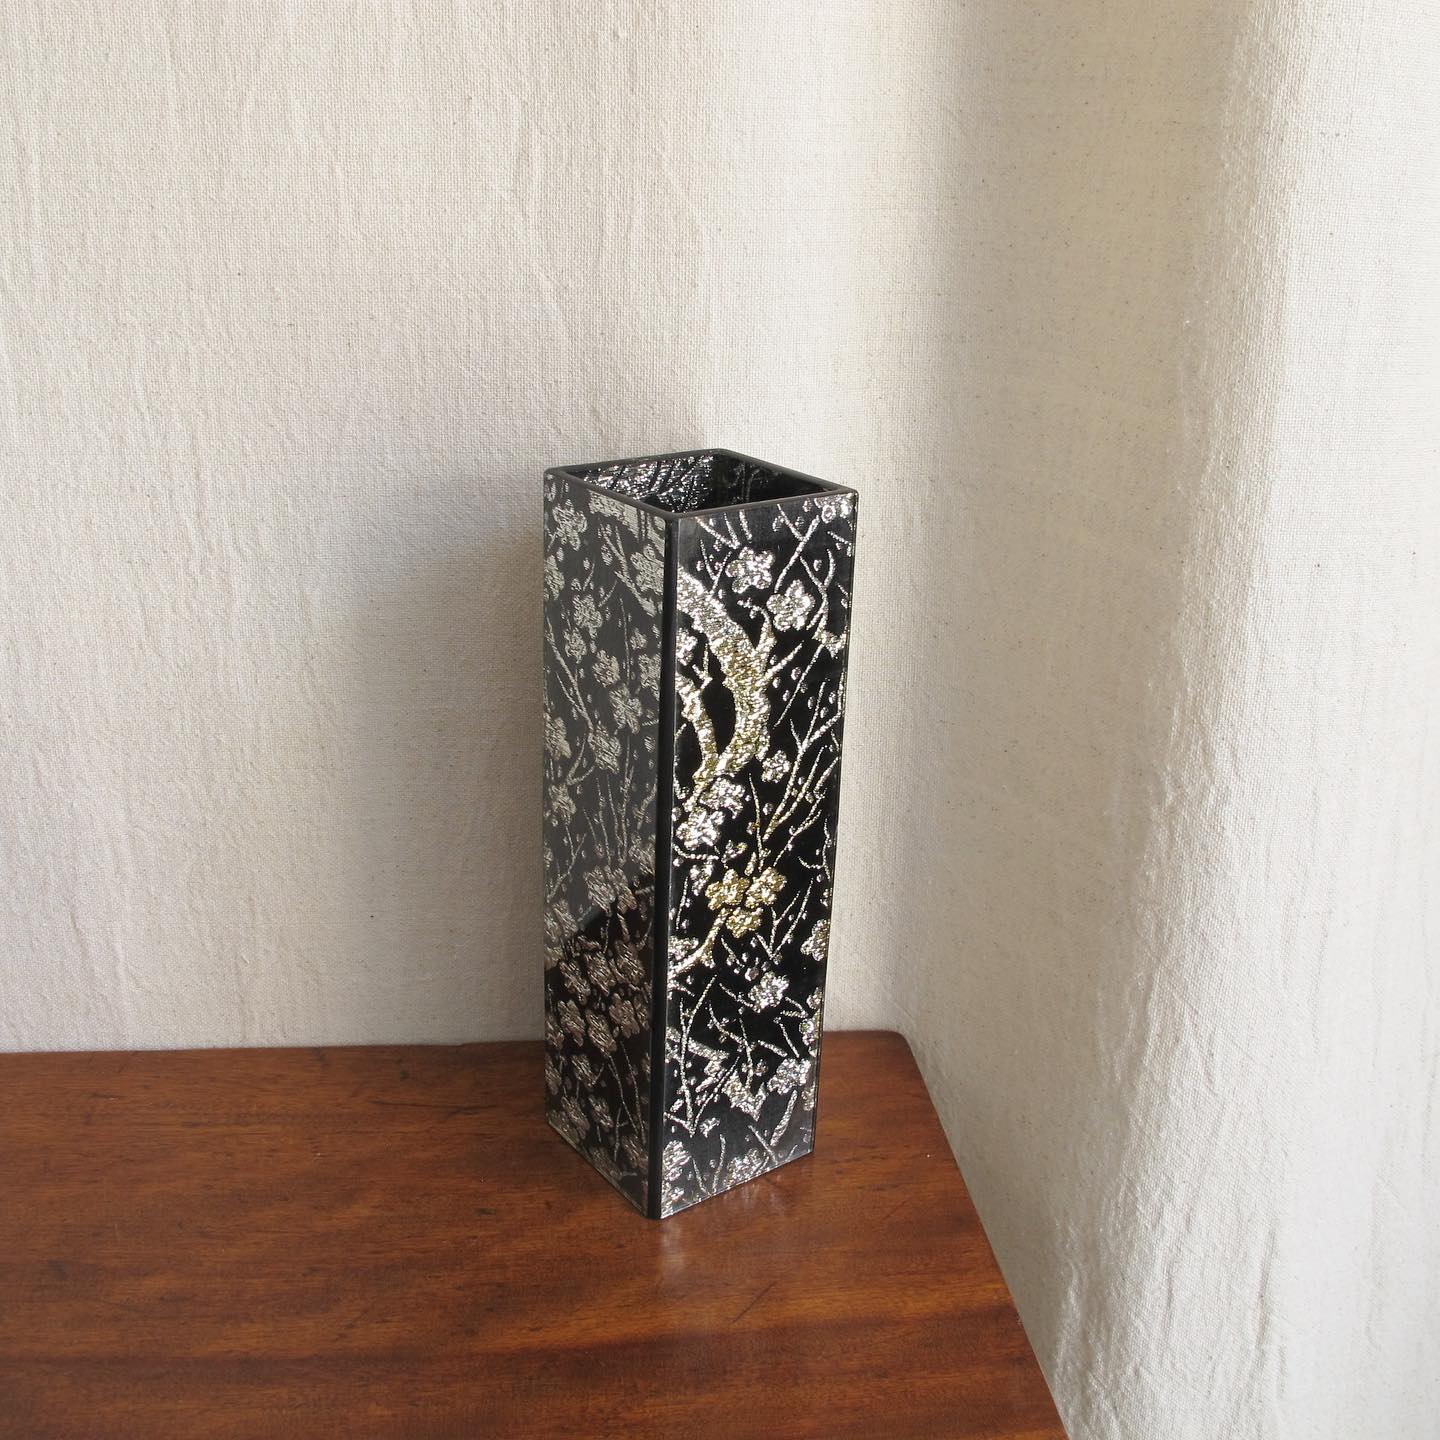 Japanese vase composed of fine metallic kimono silk encased in glass, made by Kano, c.1970